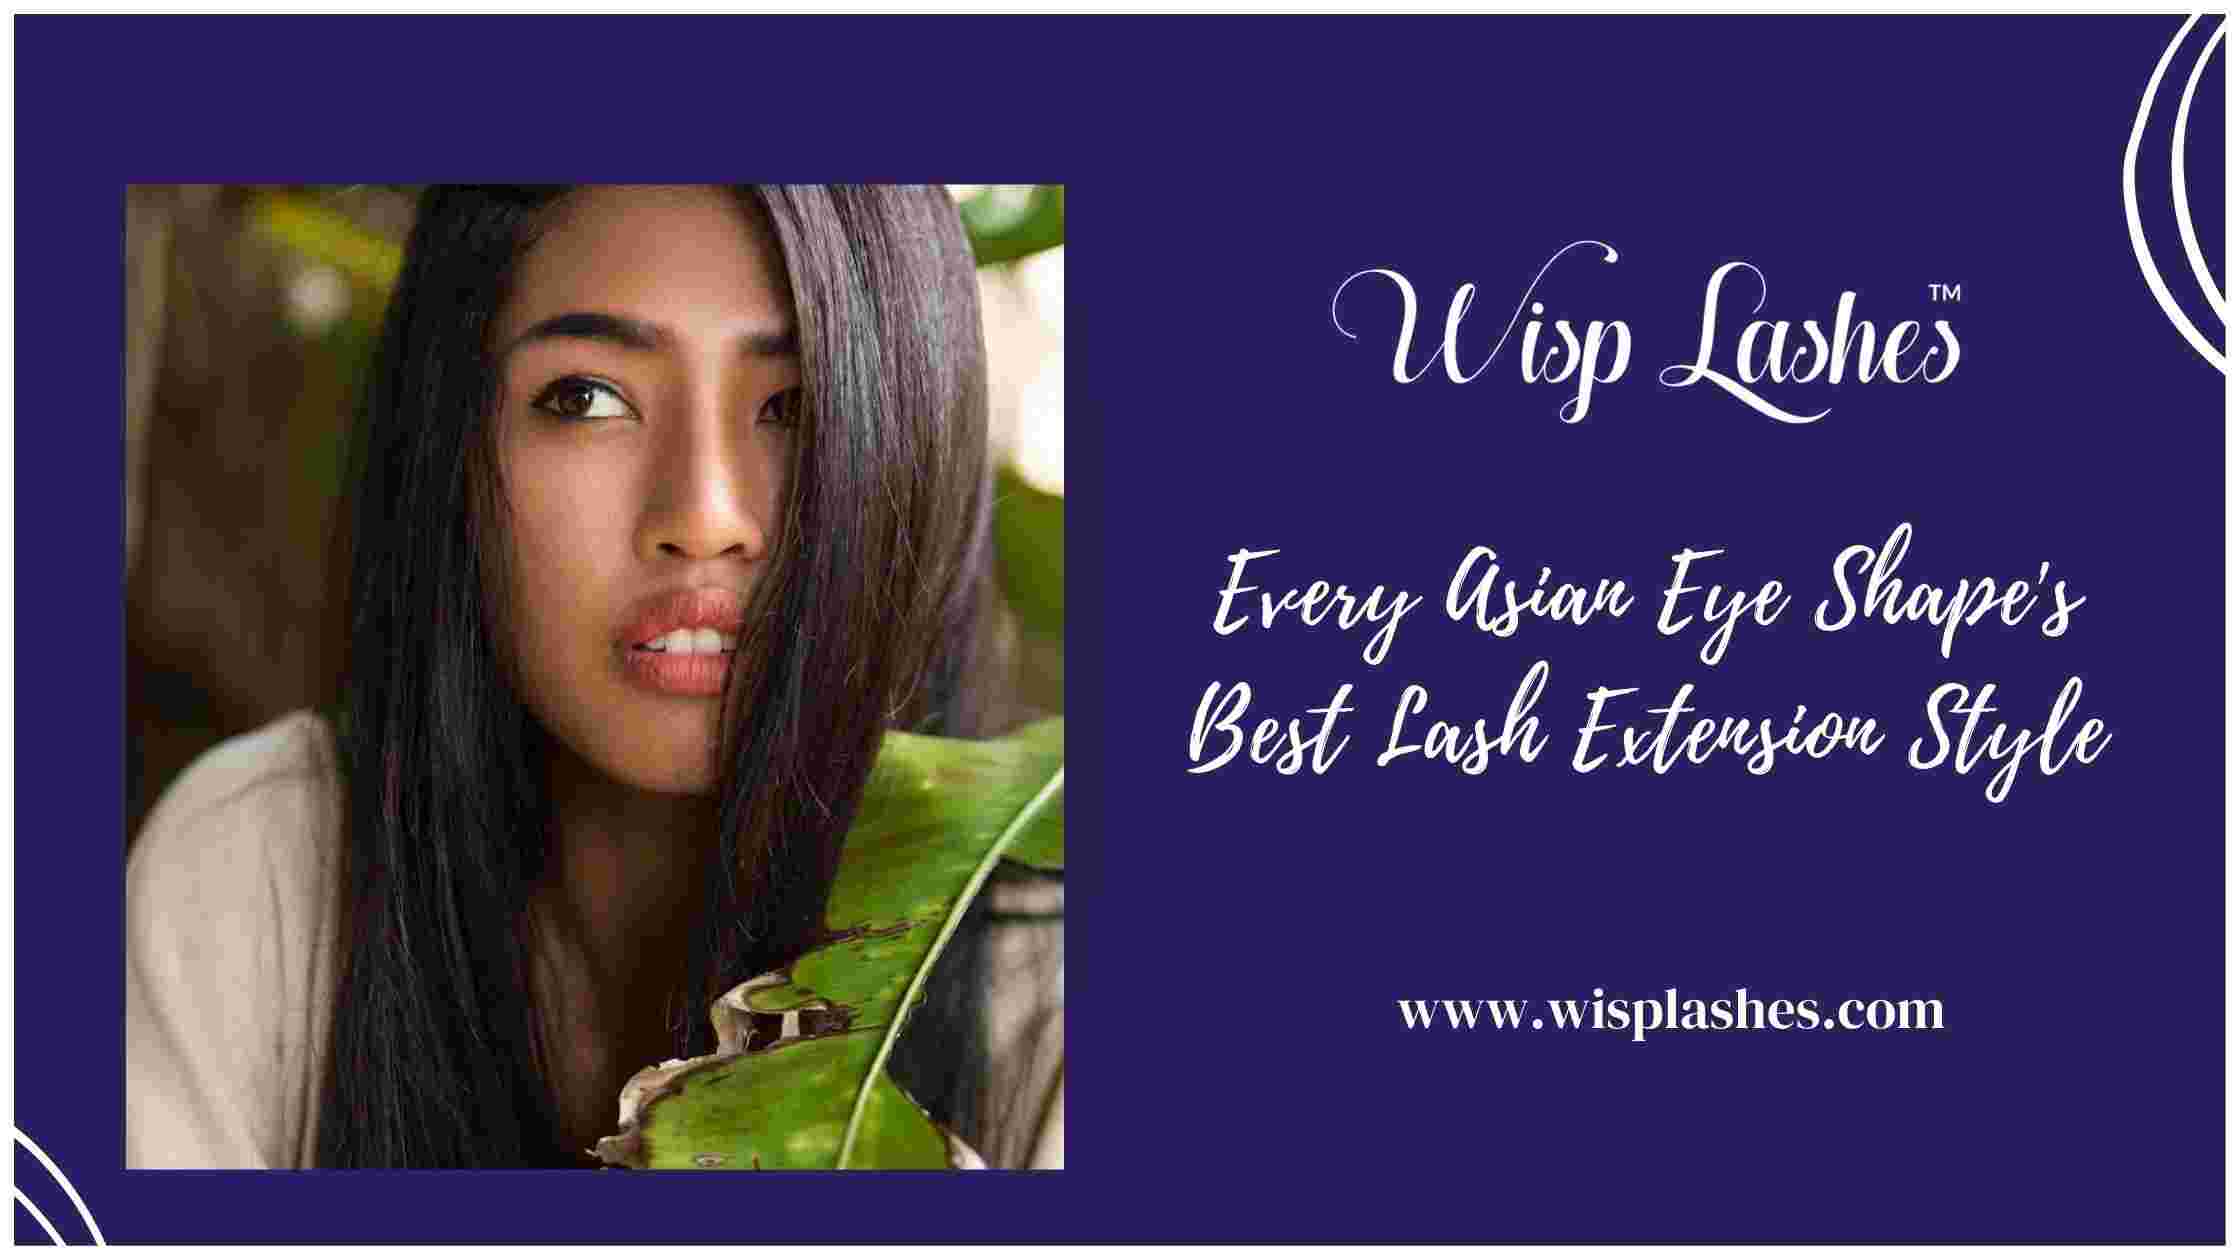 Every Asian Eye Shape's Best Lash Extension Style - TheOmniBuzz